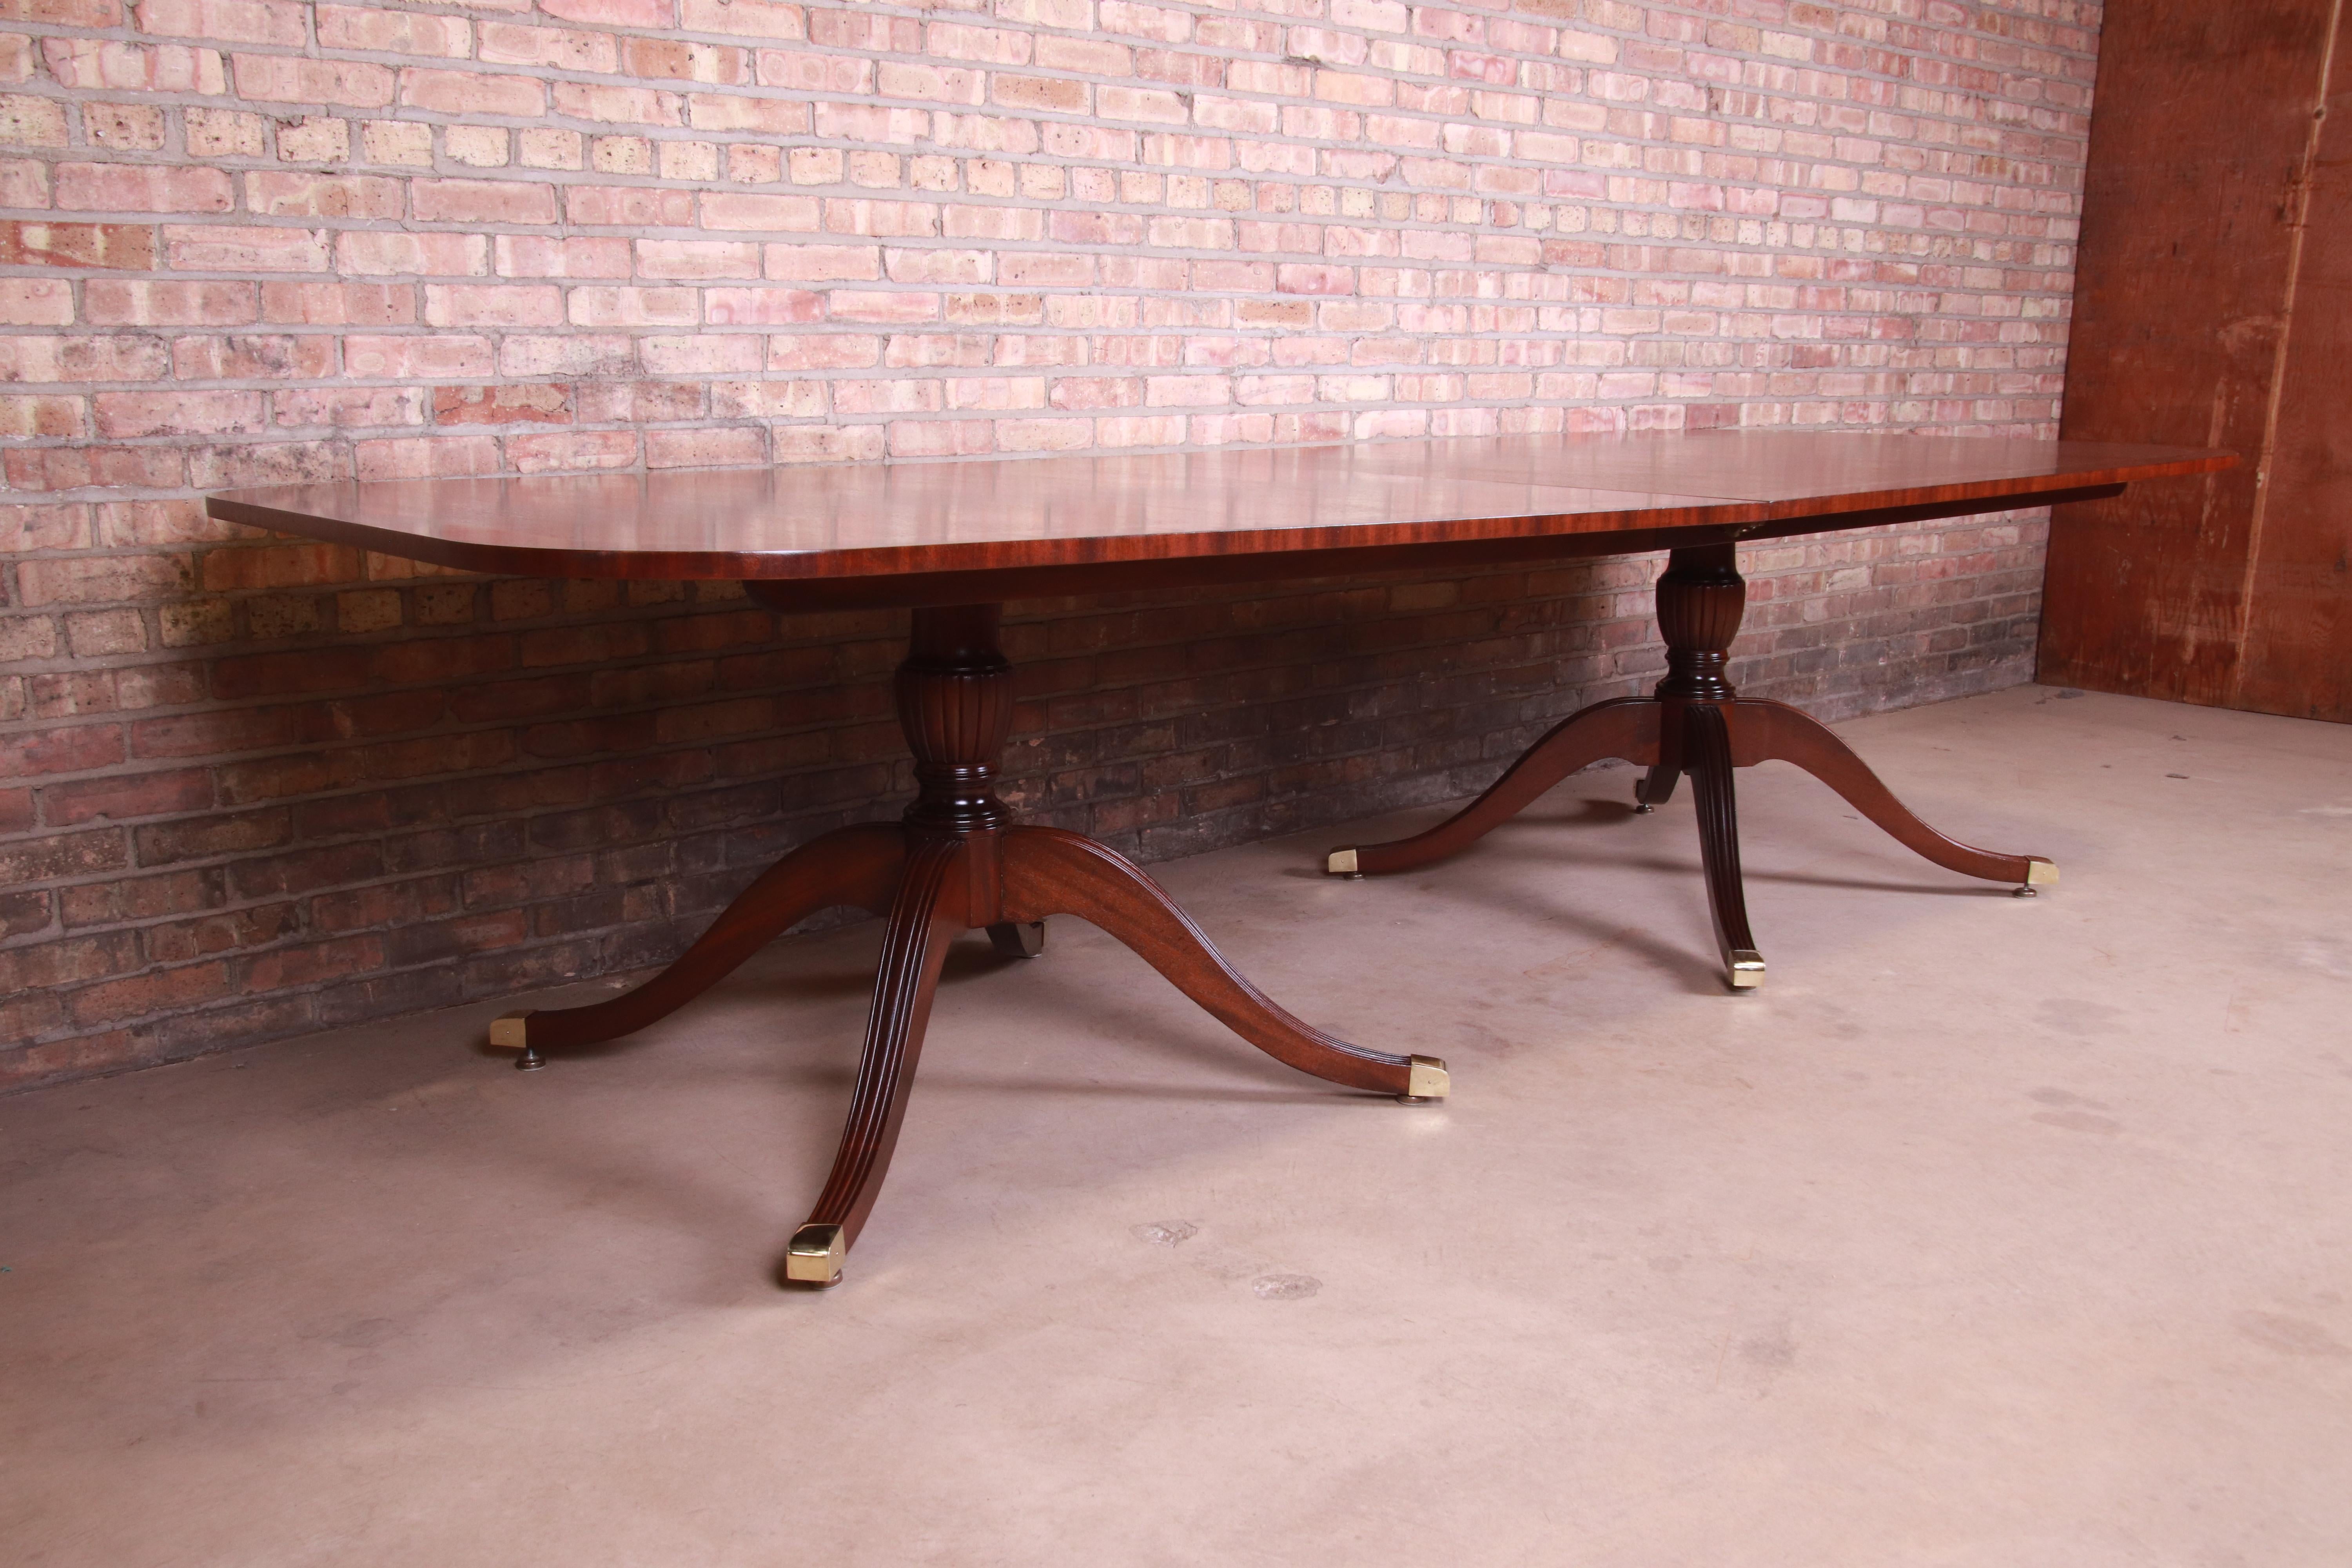 20th Century Councill Georgian Mahogany Double Pedestal Banquet Dining Table, Refinished